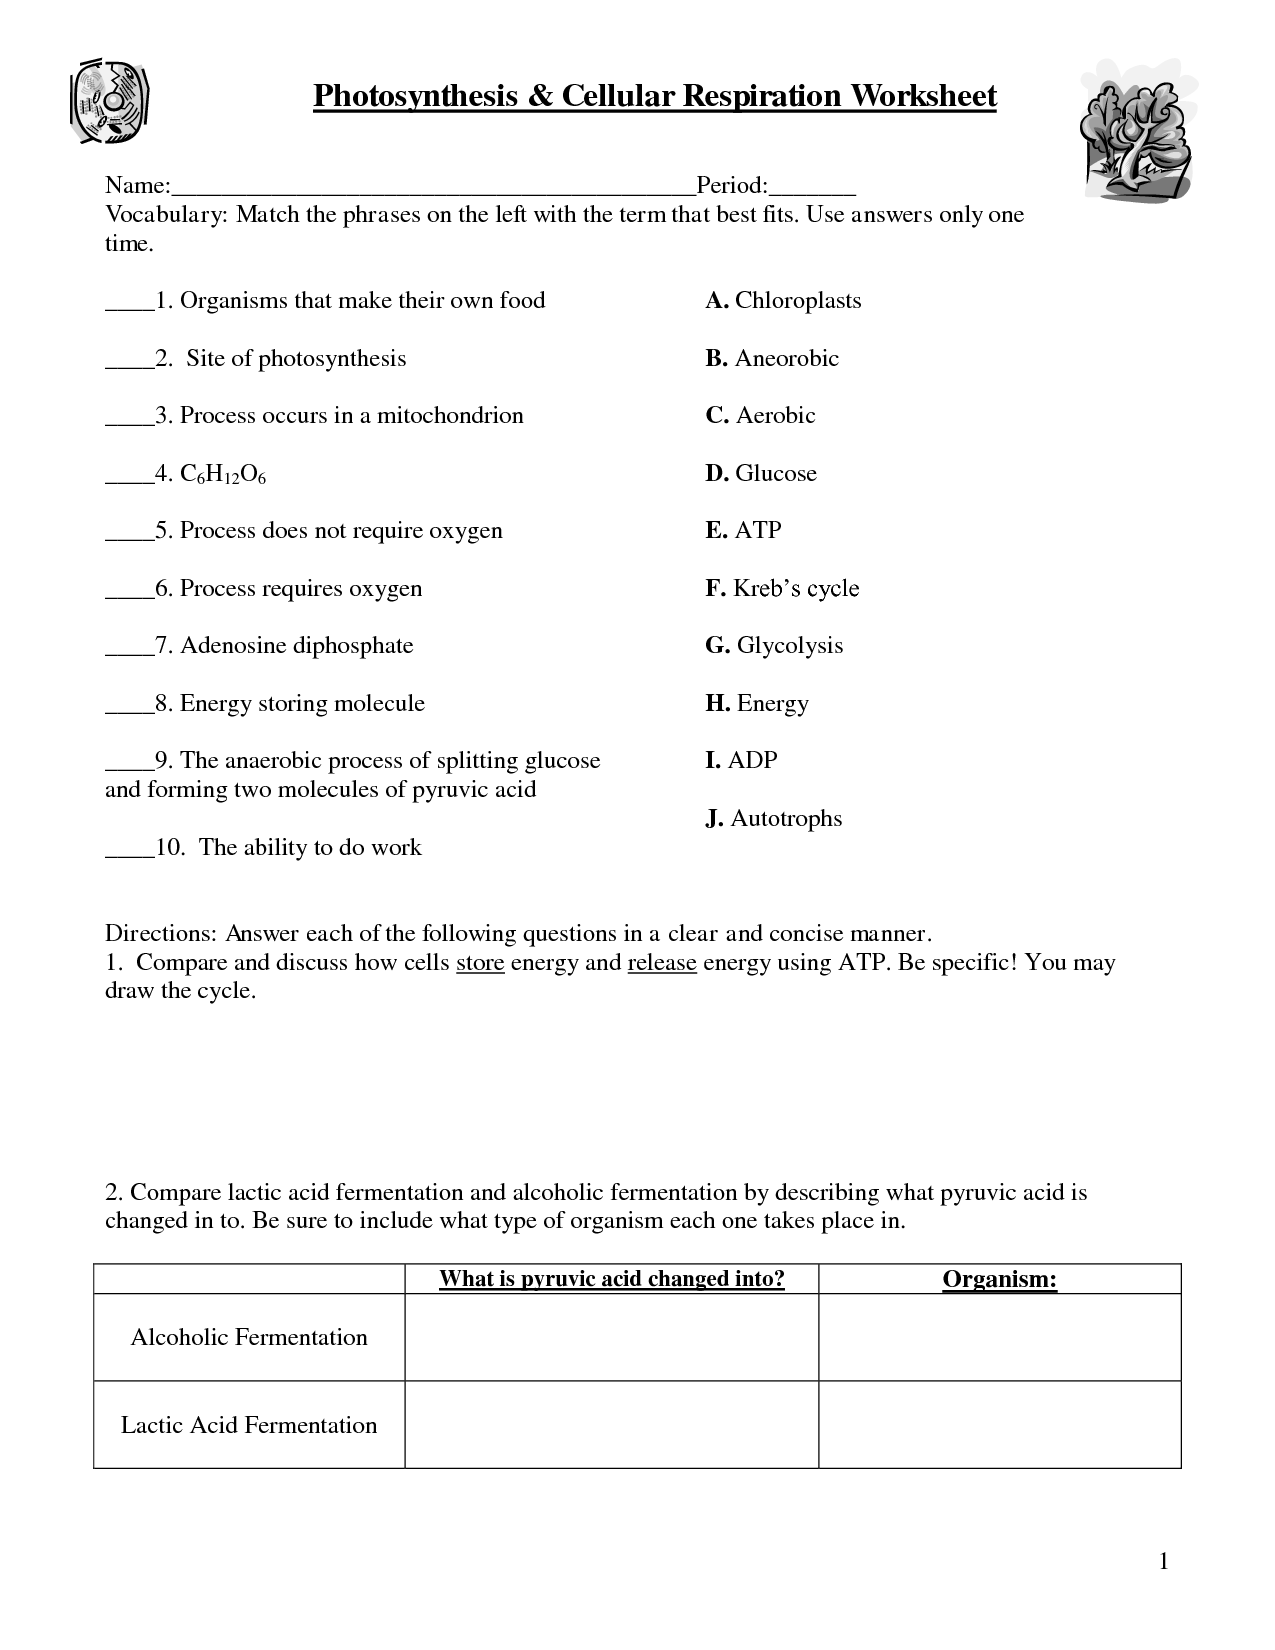 Photosynthesis Cellular Respiration Worksheet Answers Image